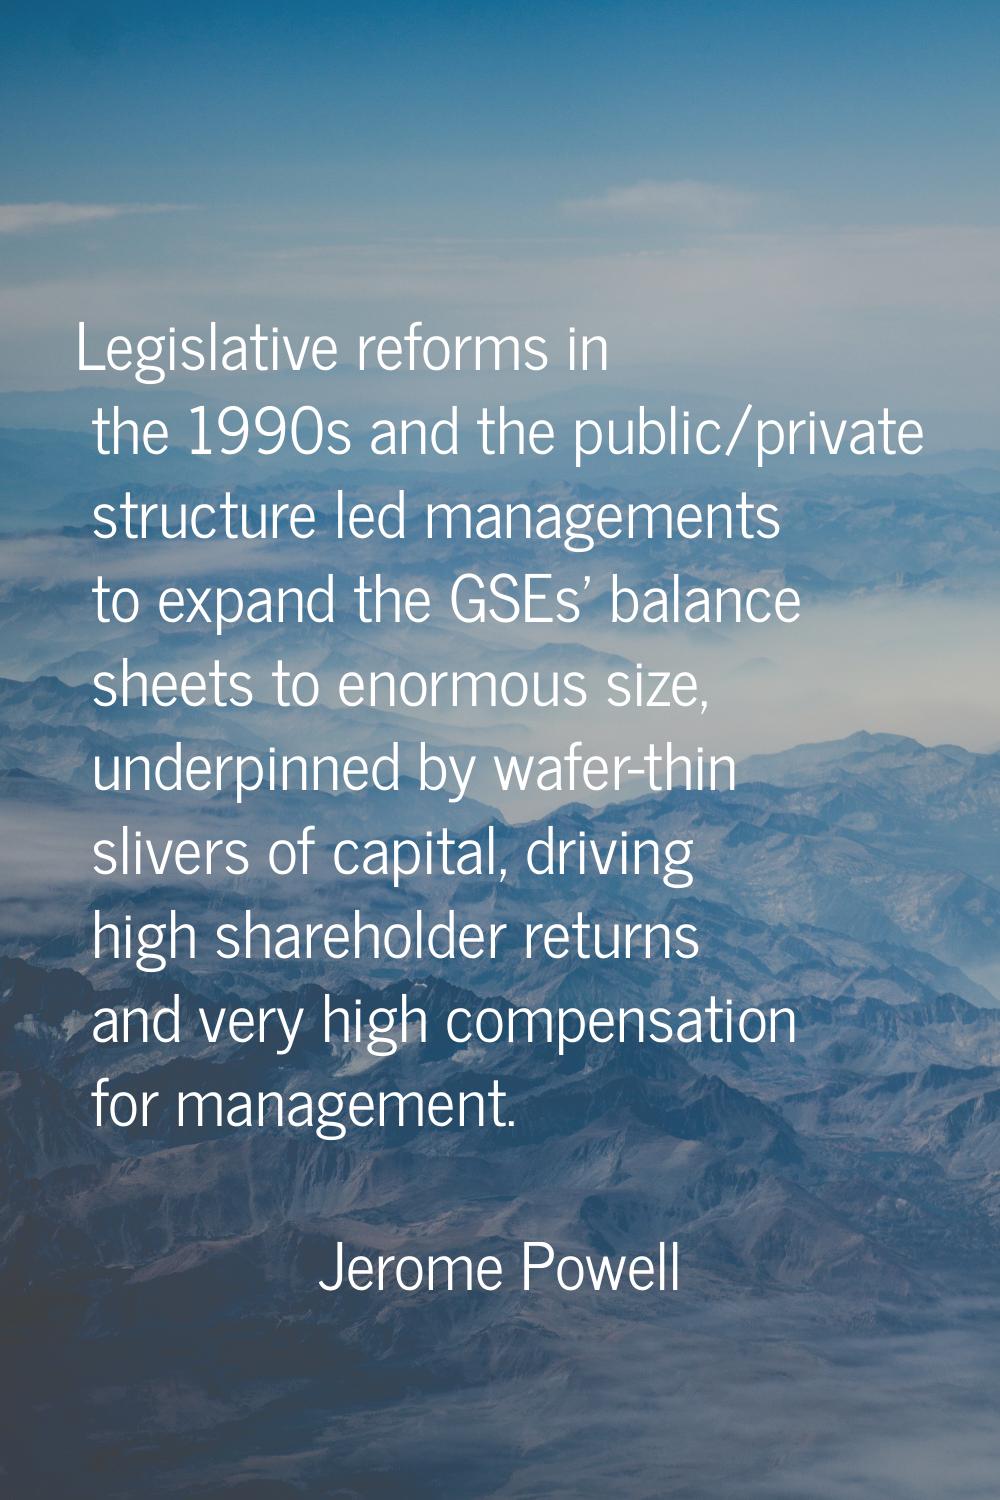 Legislative reforms in the 1990s and the public/private structure led managements to expand the GSE